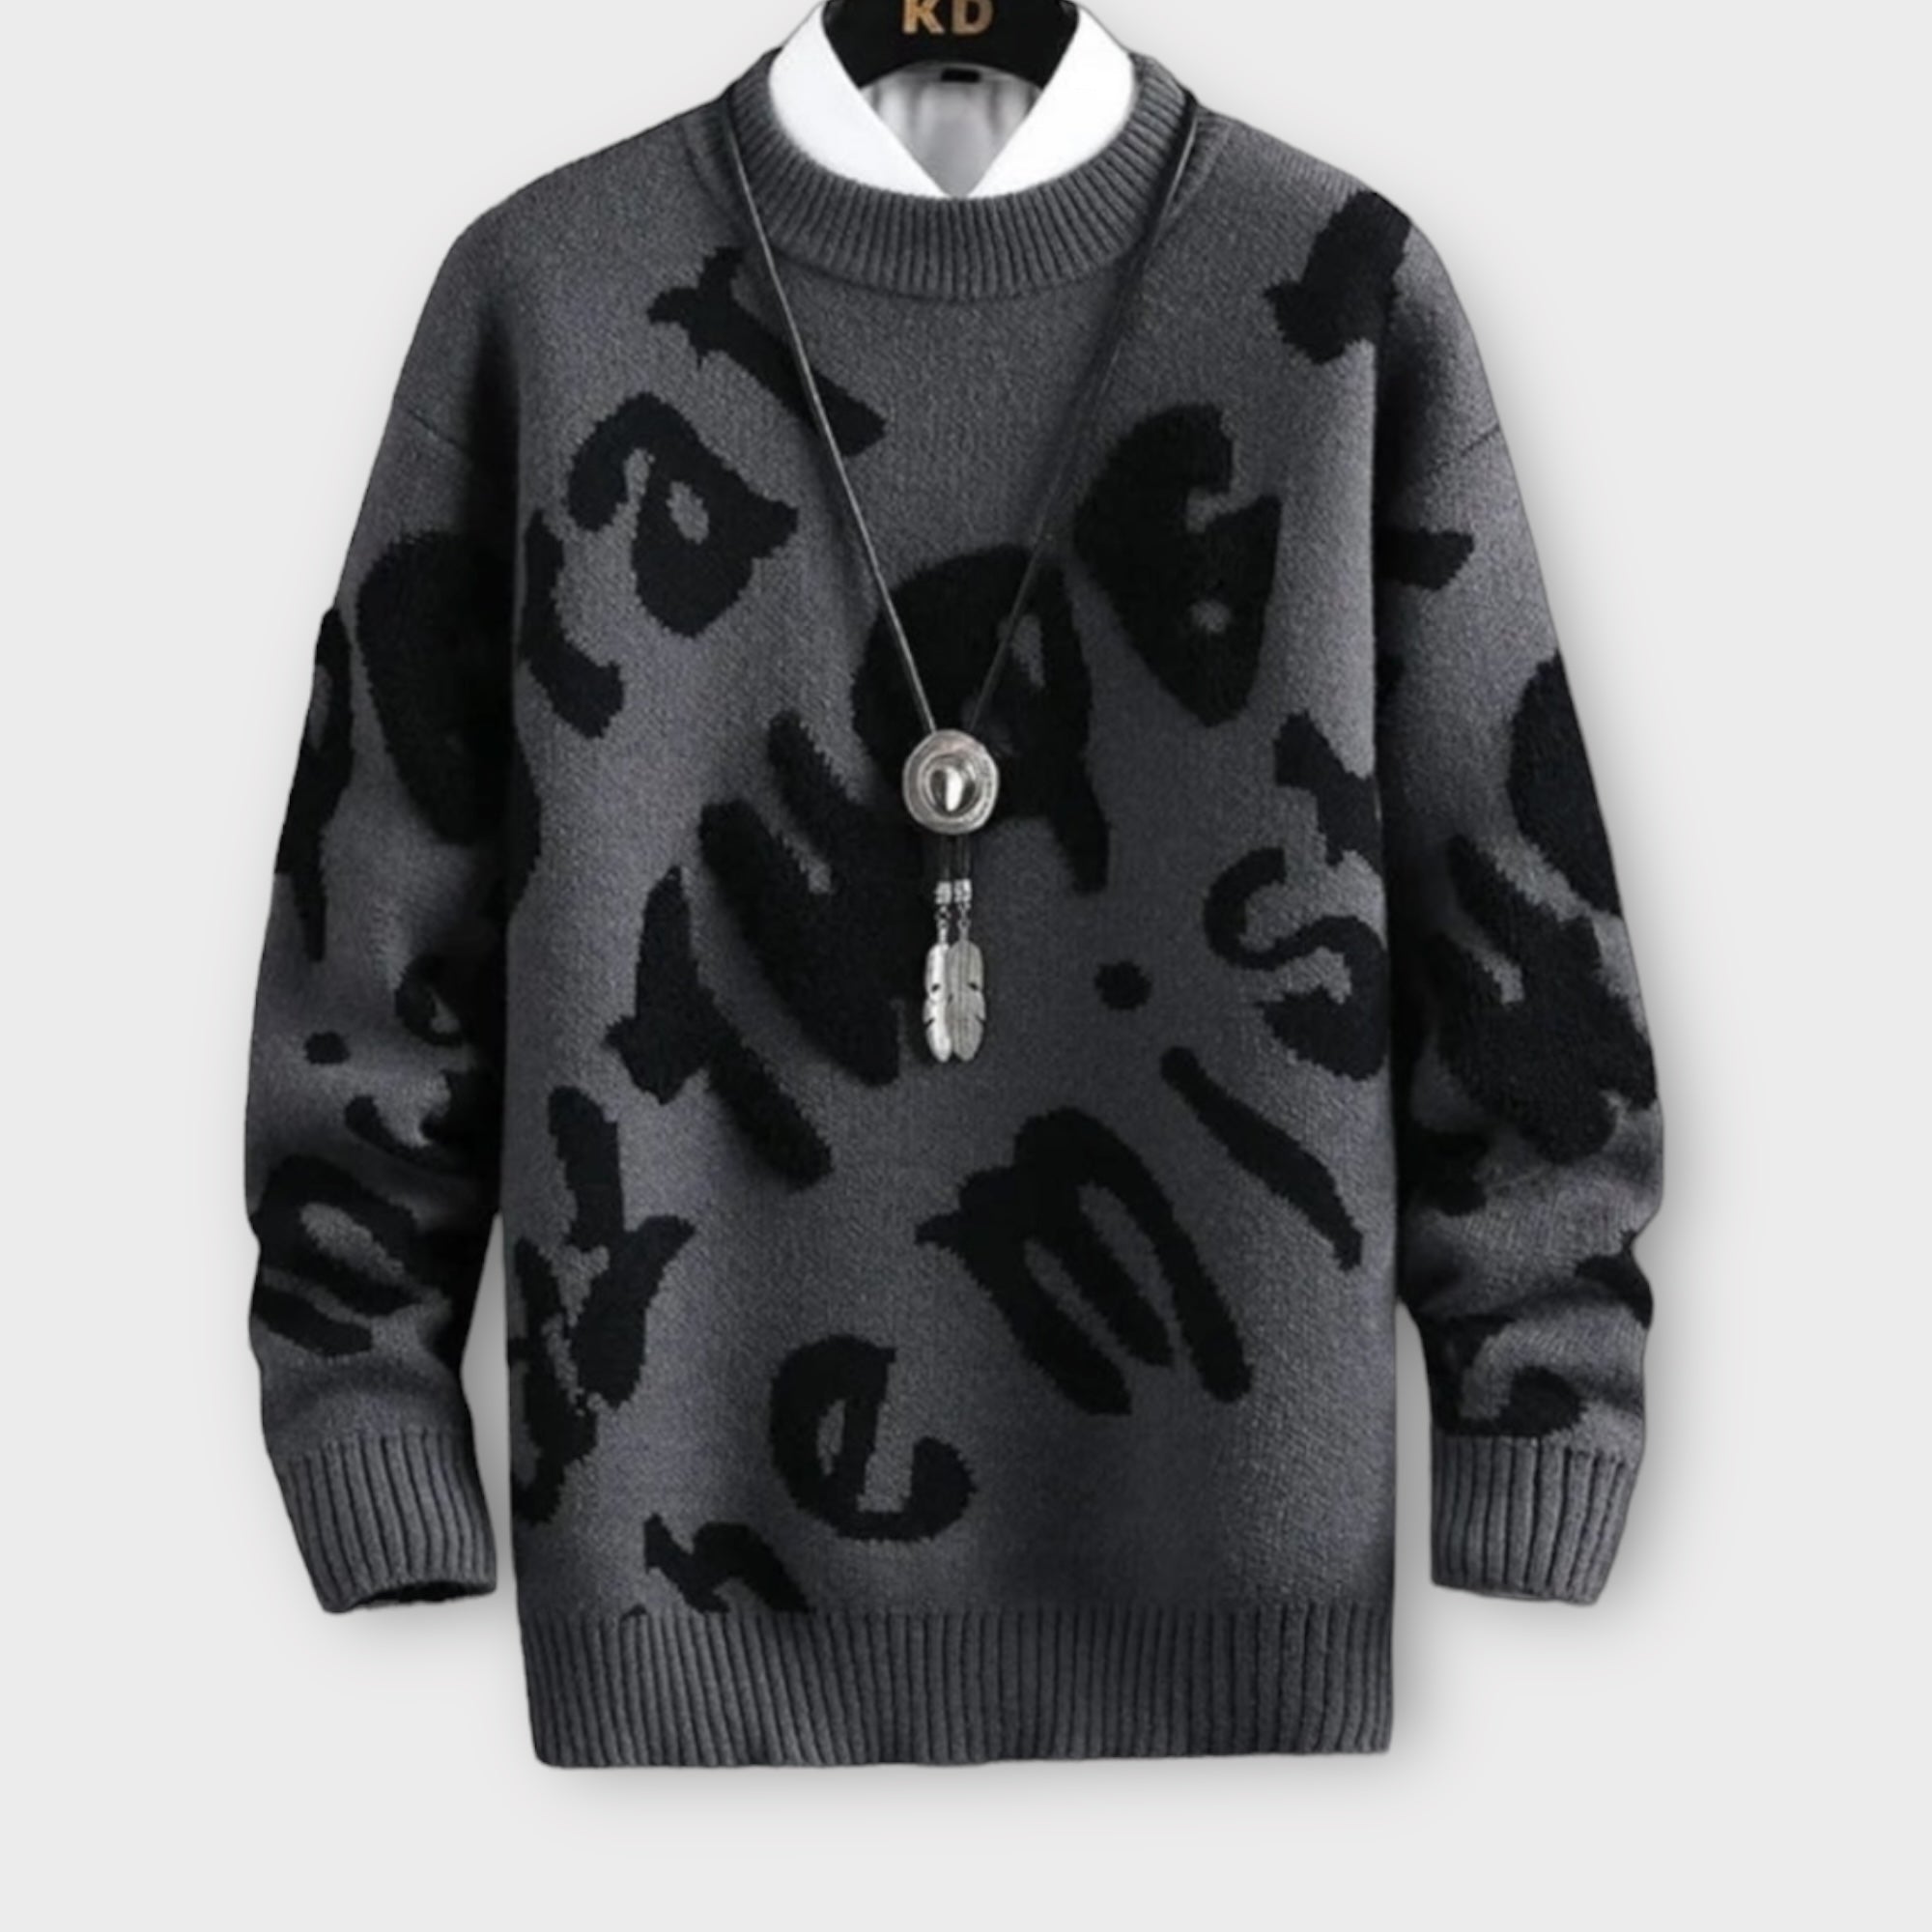 'XAU' Knitted sweater for men